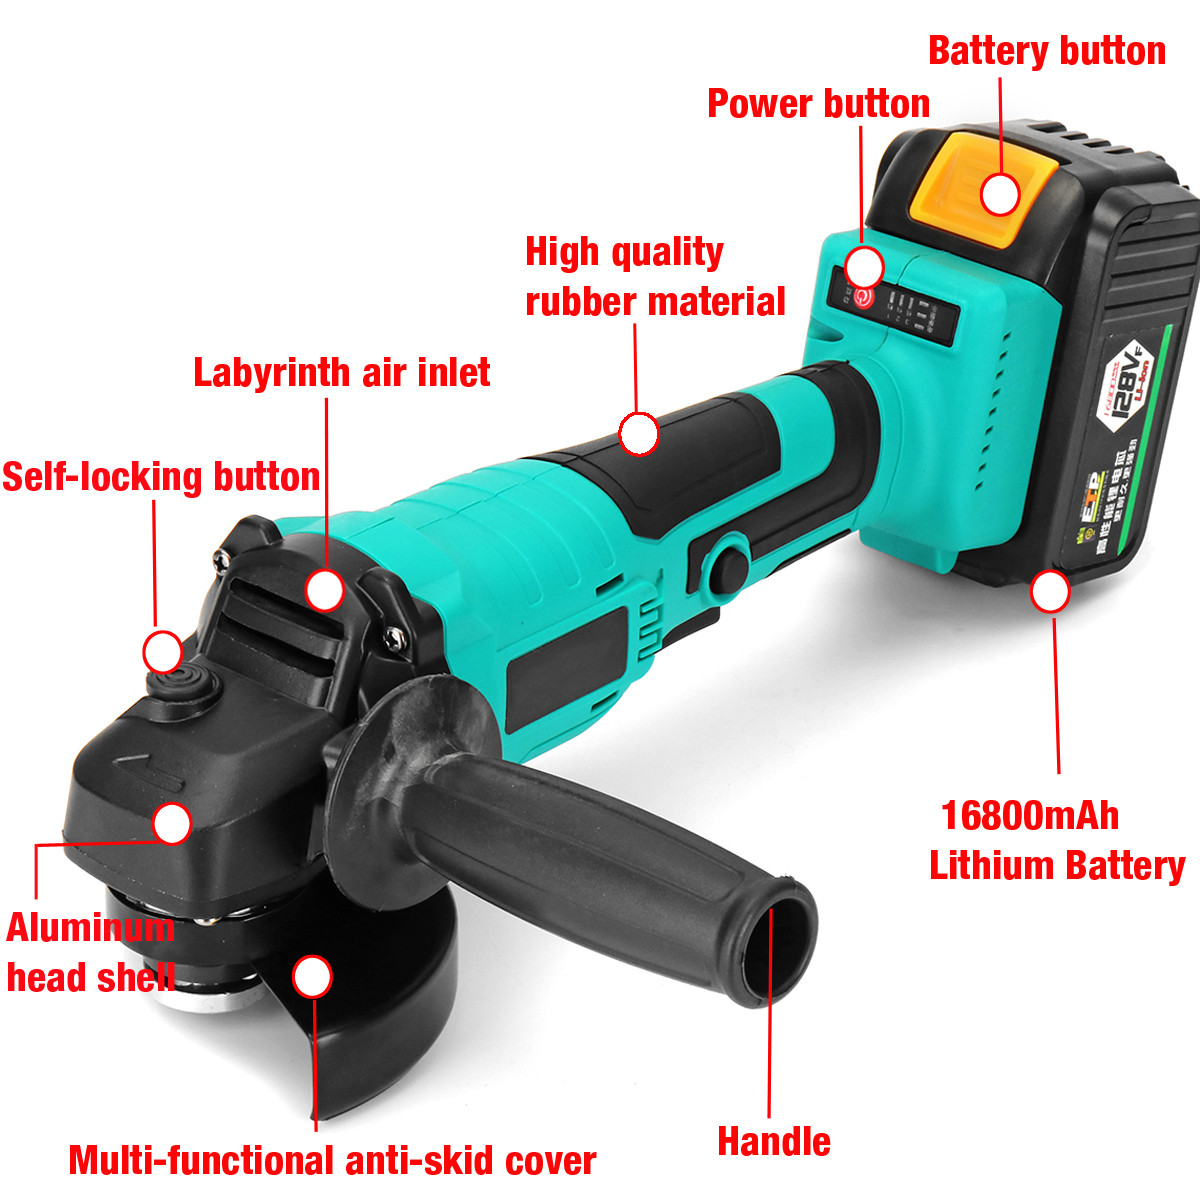 128VF-1300W-10000RPM-Cordless-Brushless-Angle-Grinder-with-16800mAh-Li-Ion-Battery-1520444-4